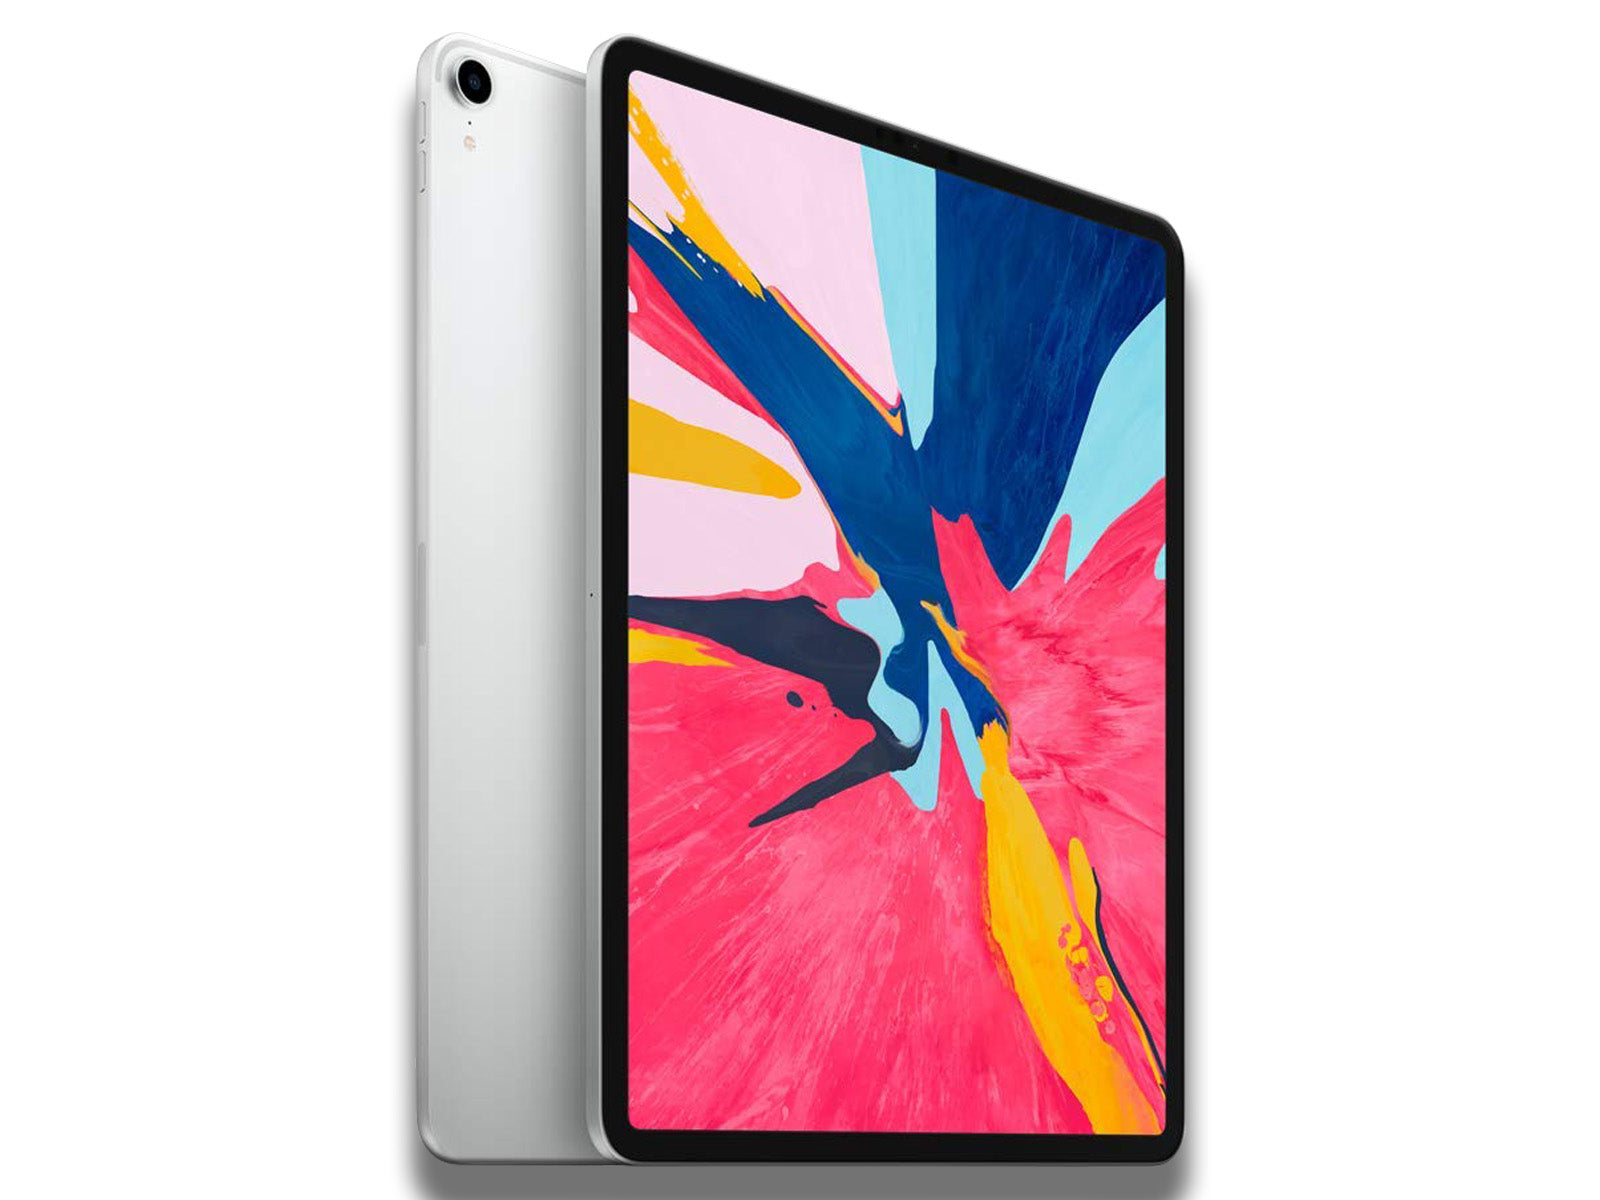 Image shows an angled view of the Silver Apple iPad Pro 3rd Generation 12.9-inch